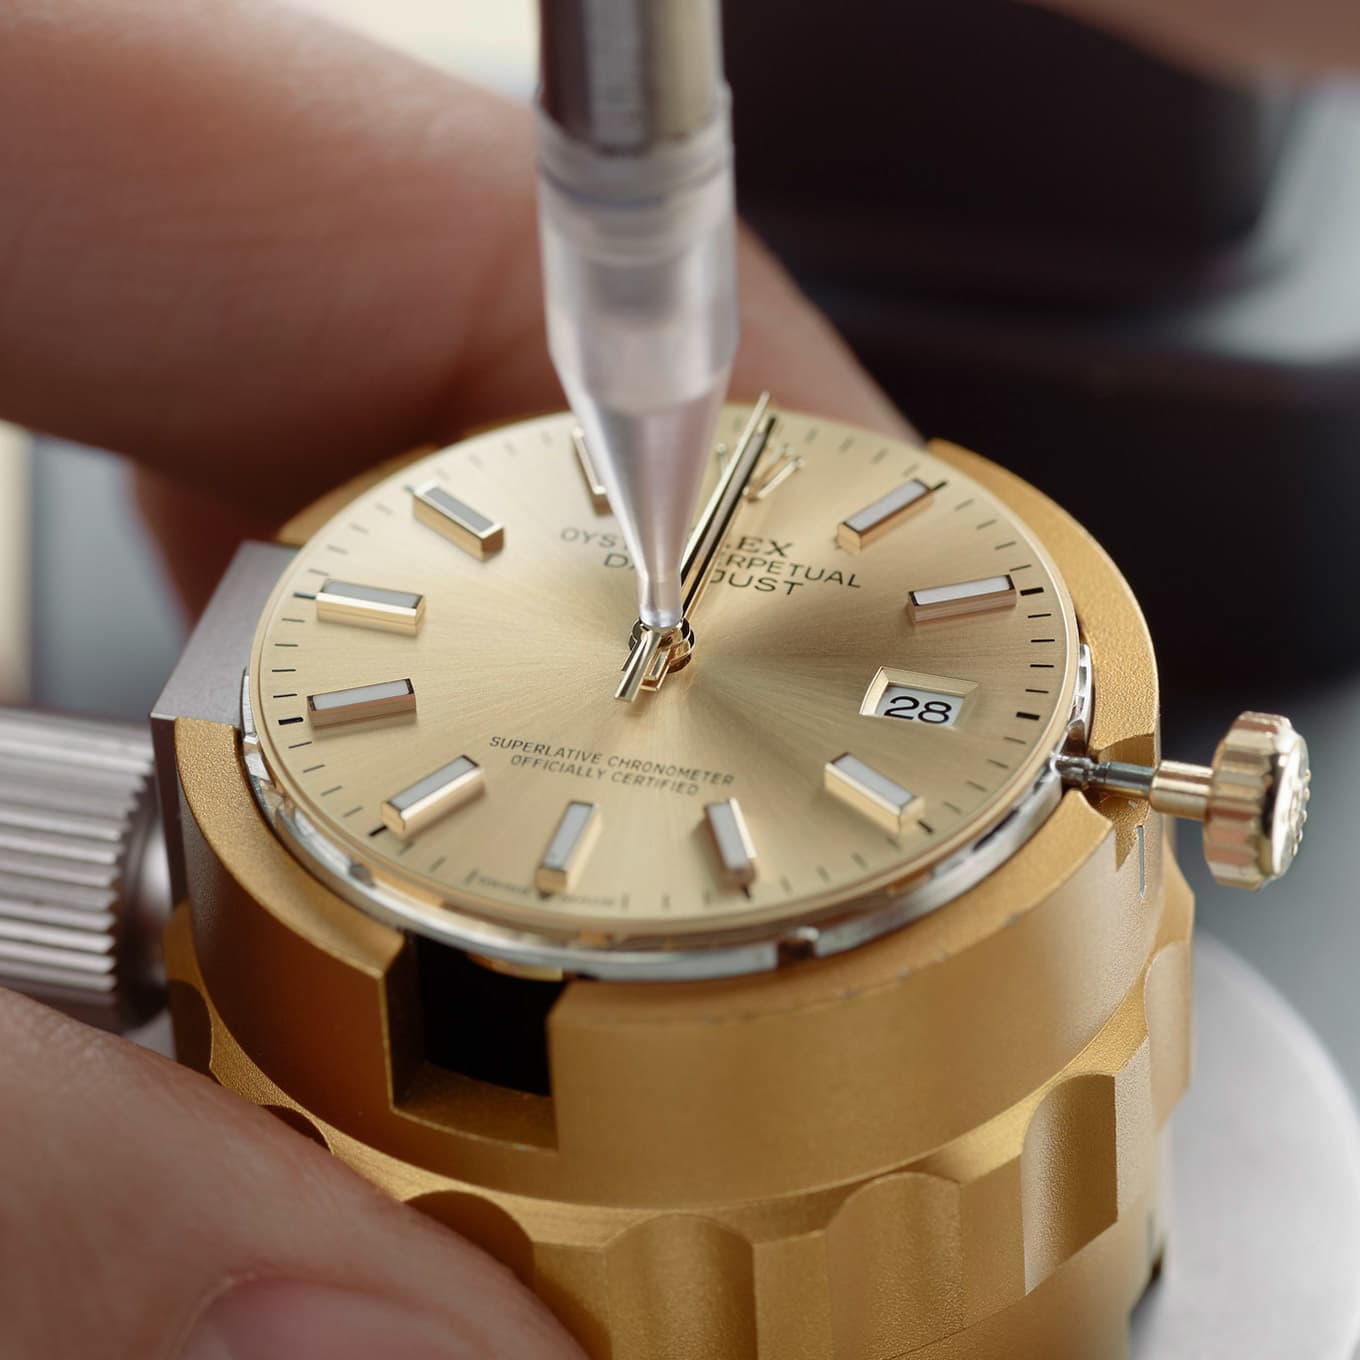 watch being put back into the case by a watchmaker